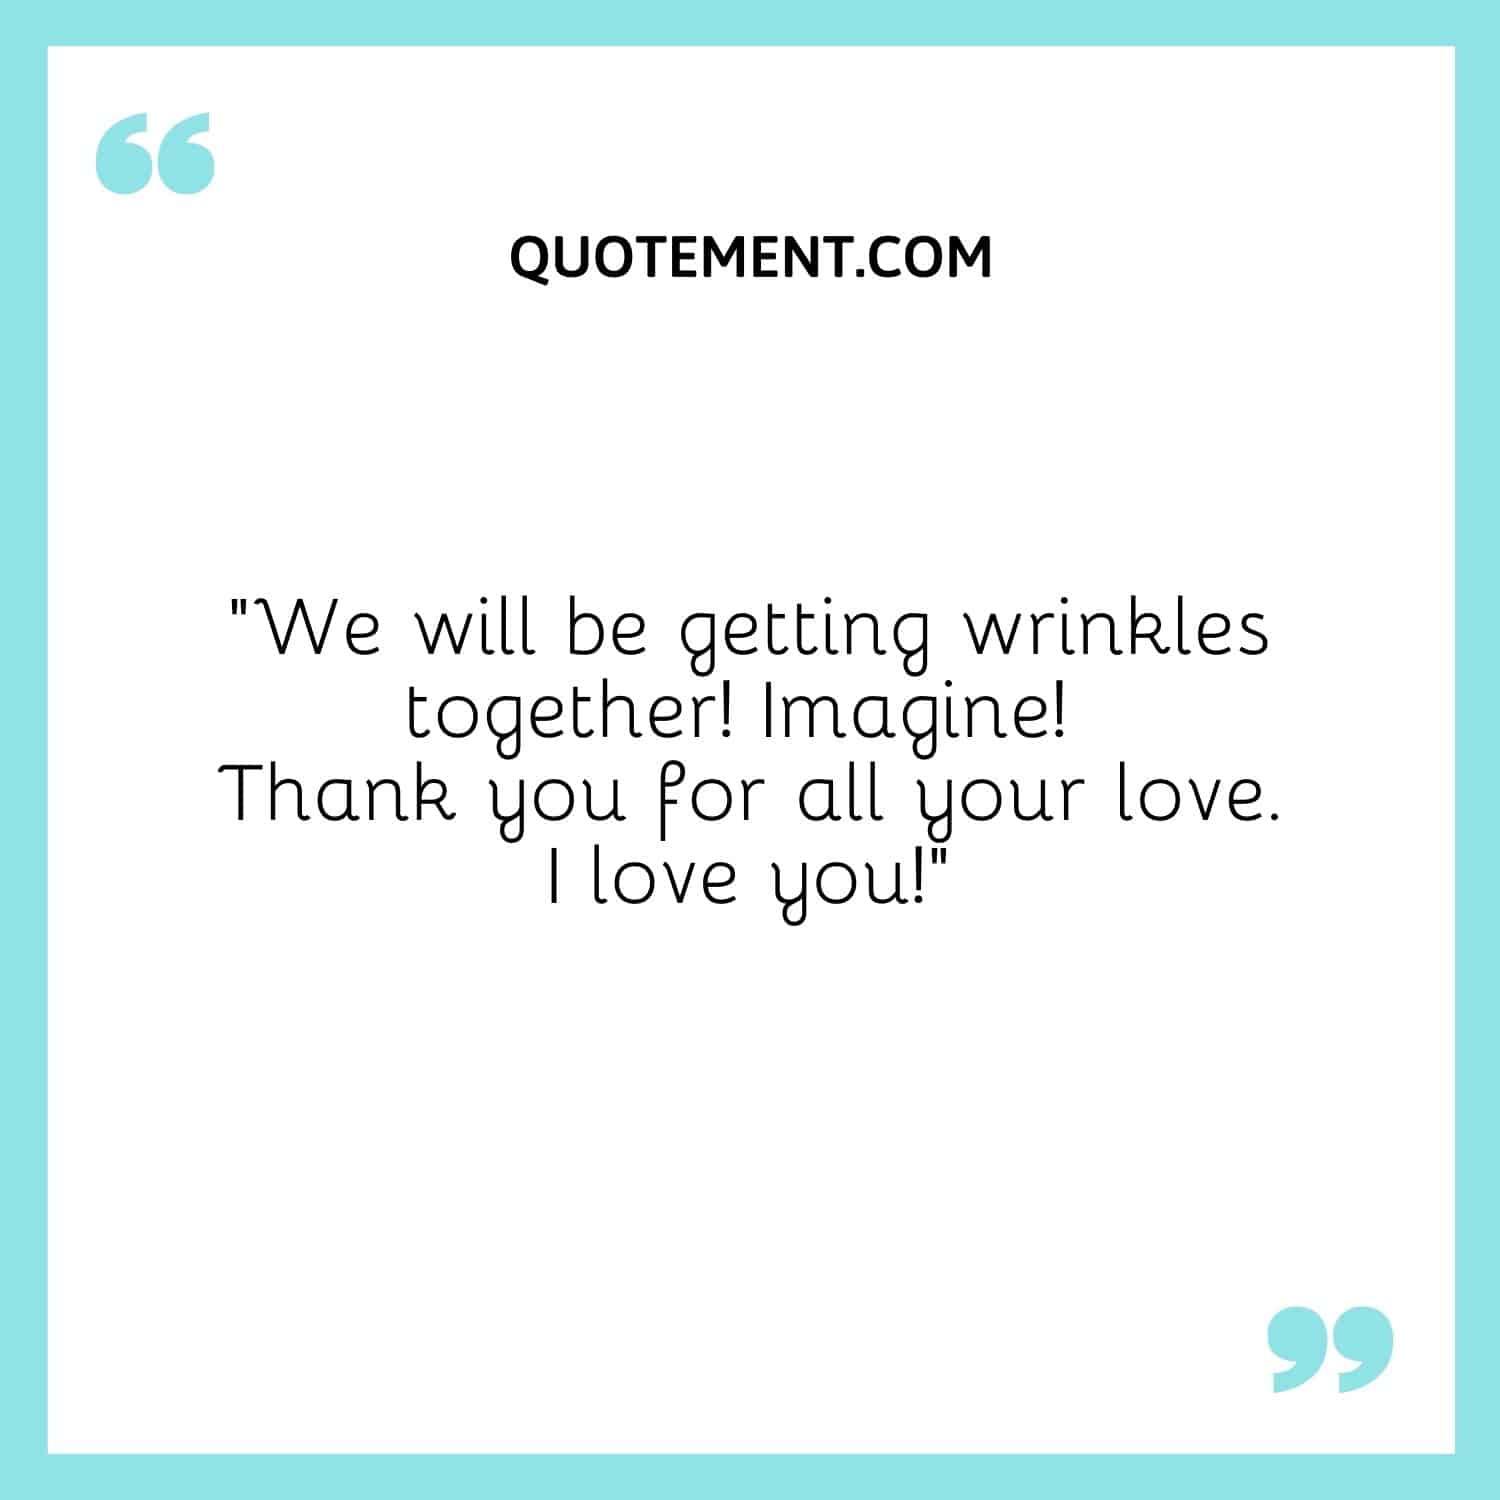 We will be getting wrinkles together! Imagine! Thank you for all your love